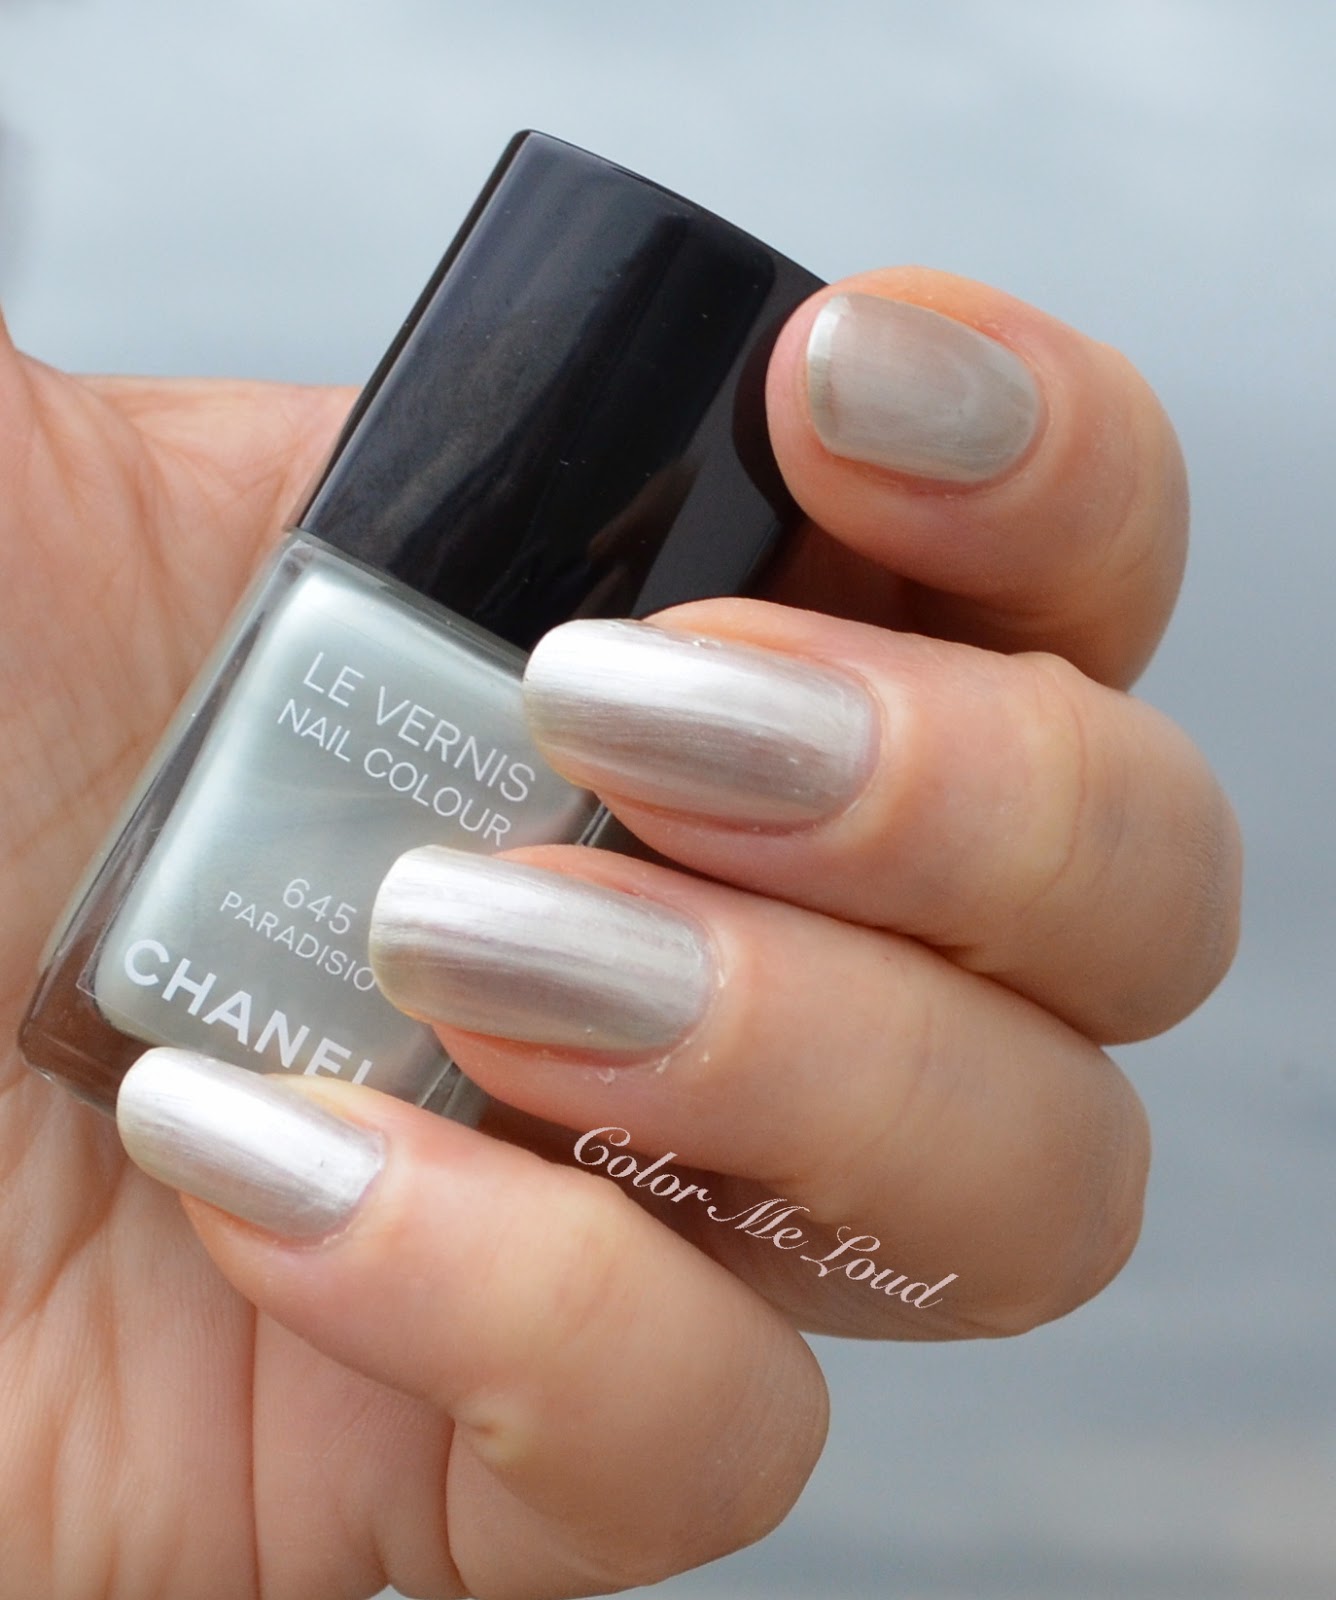 Chanel Black Pearl Le Vernis Nail Color Review & Swatches - Blushing Noir